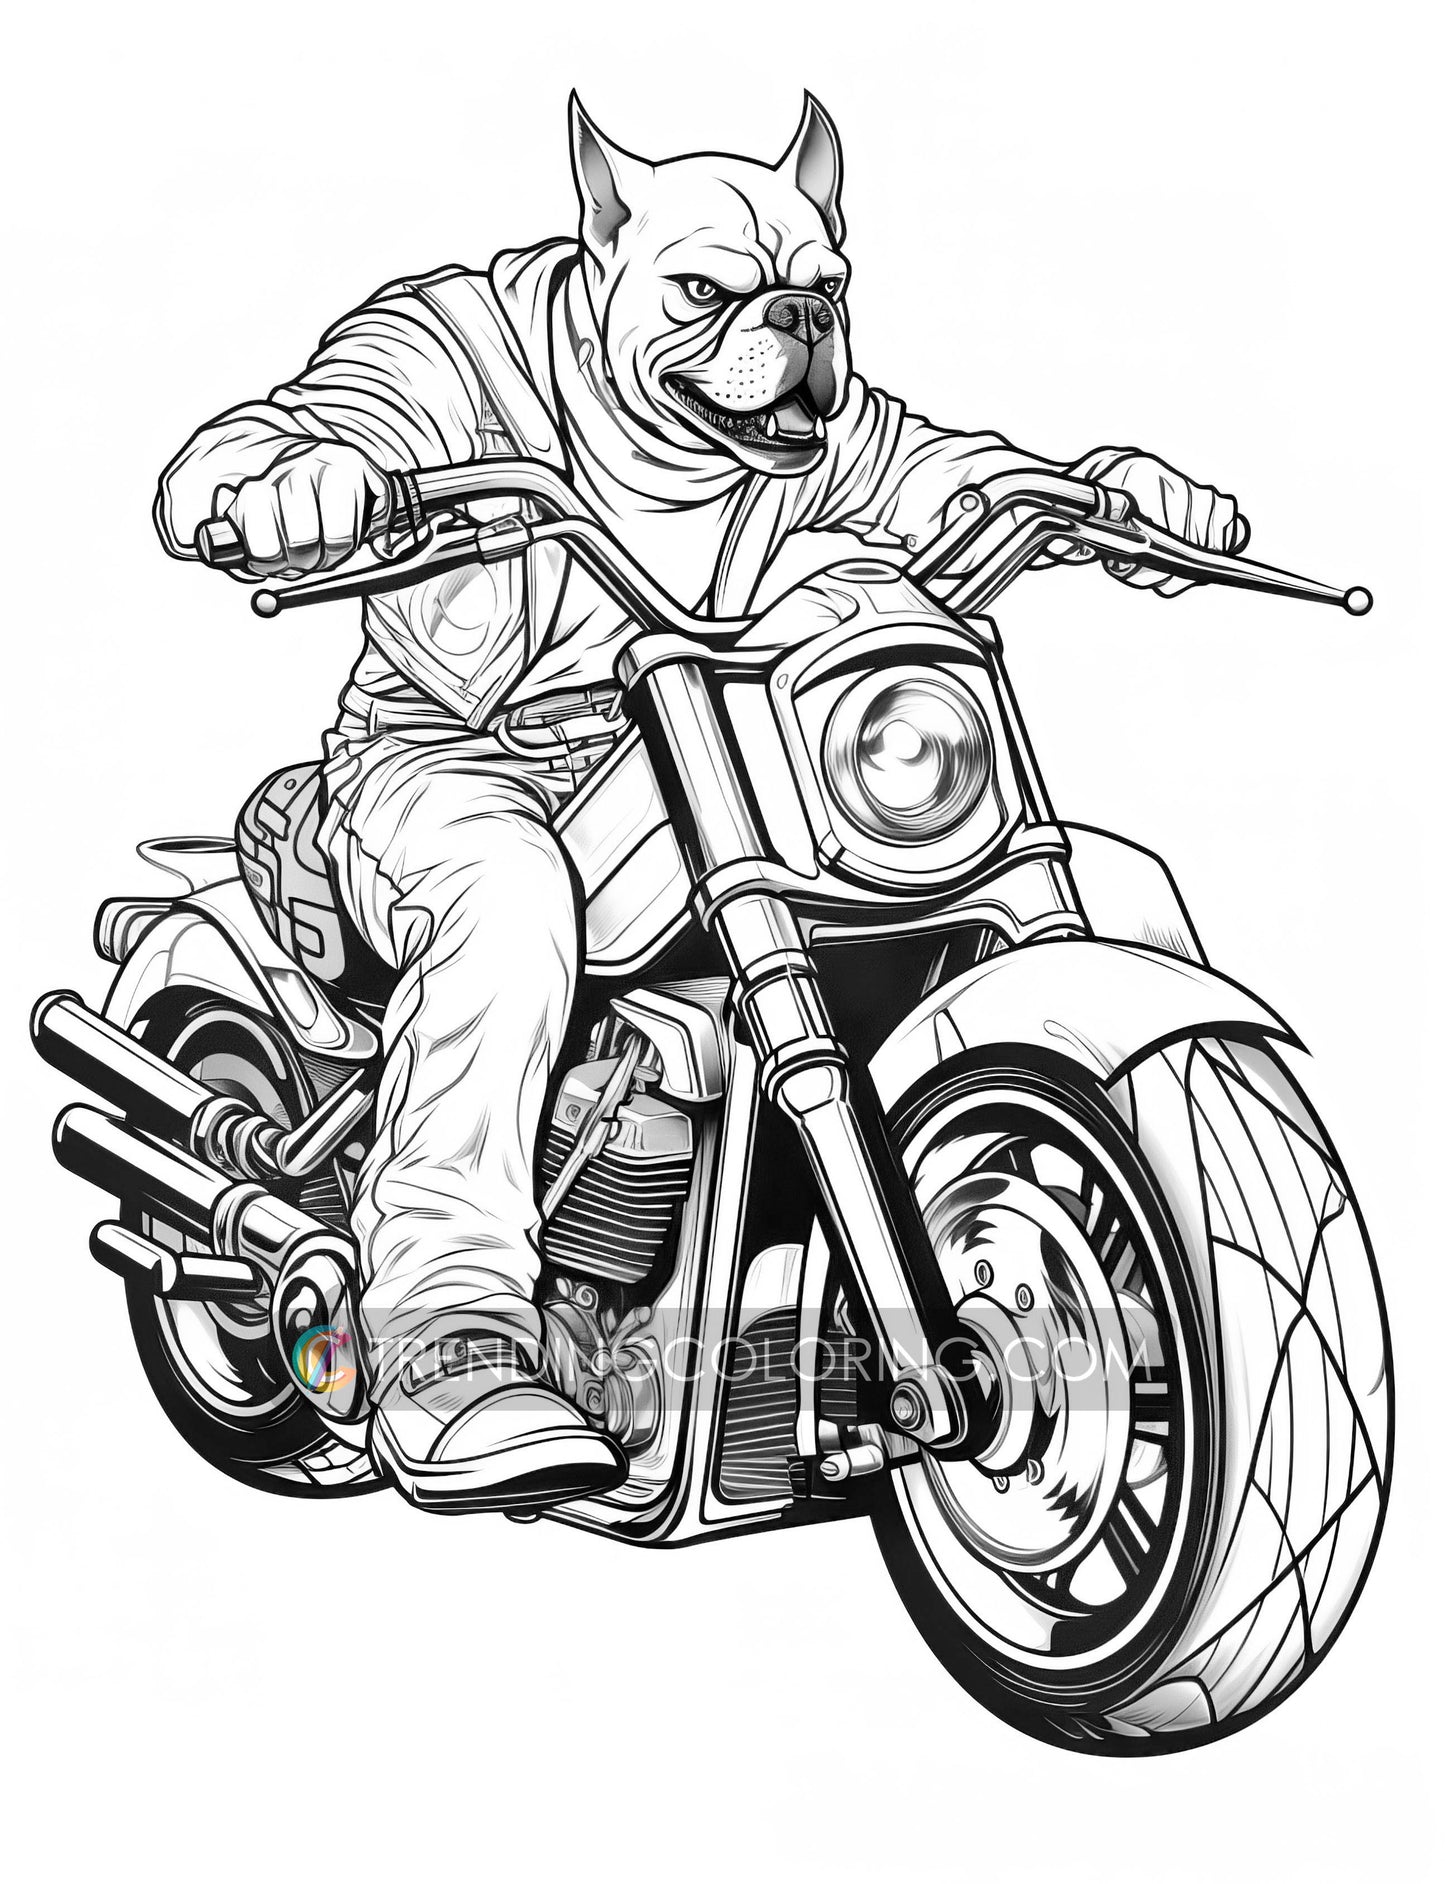 25 Animal Bikers Grayscale Coloring Pages - Instant Download - Printable PDF